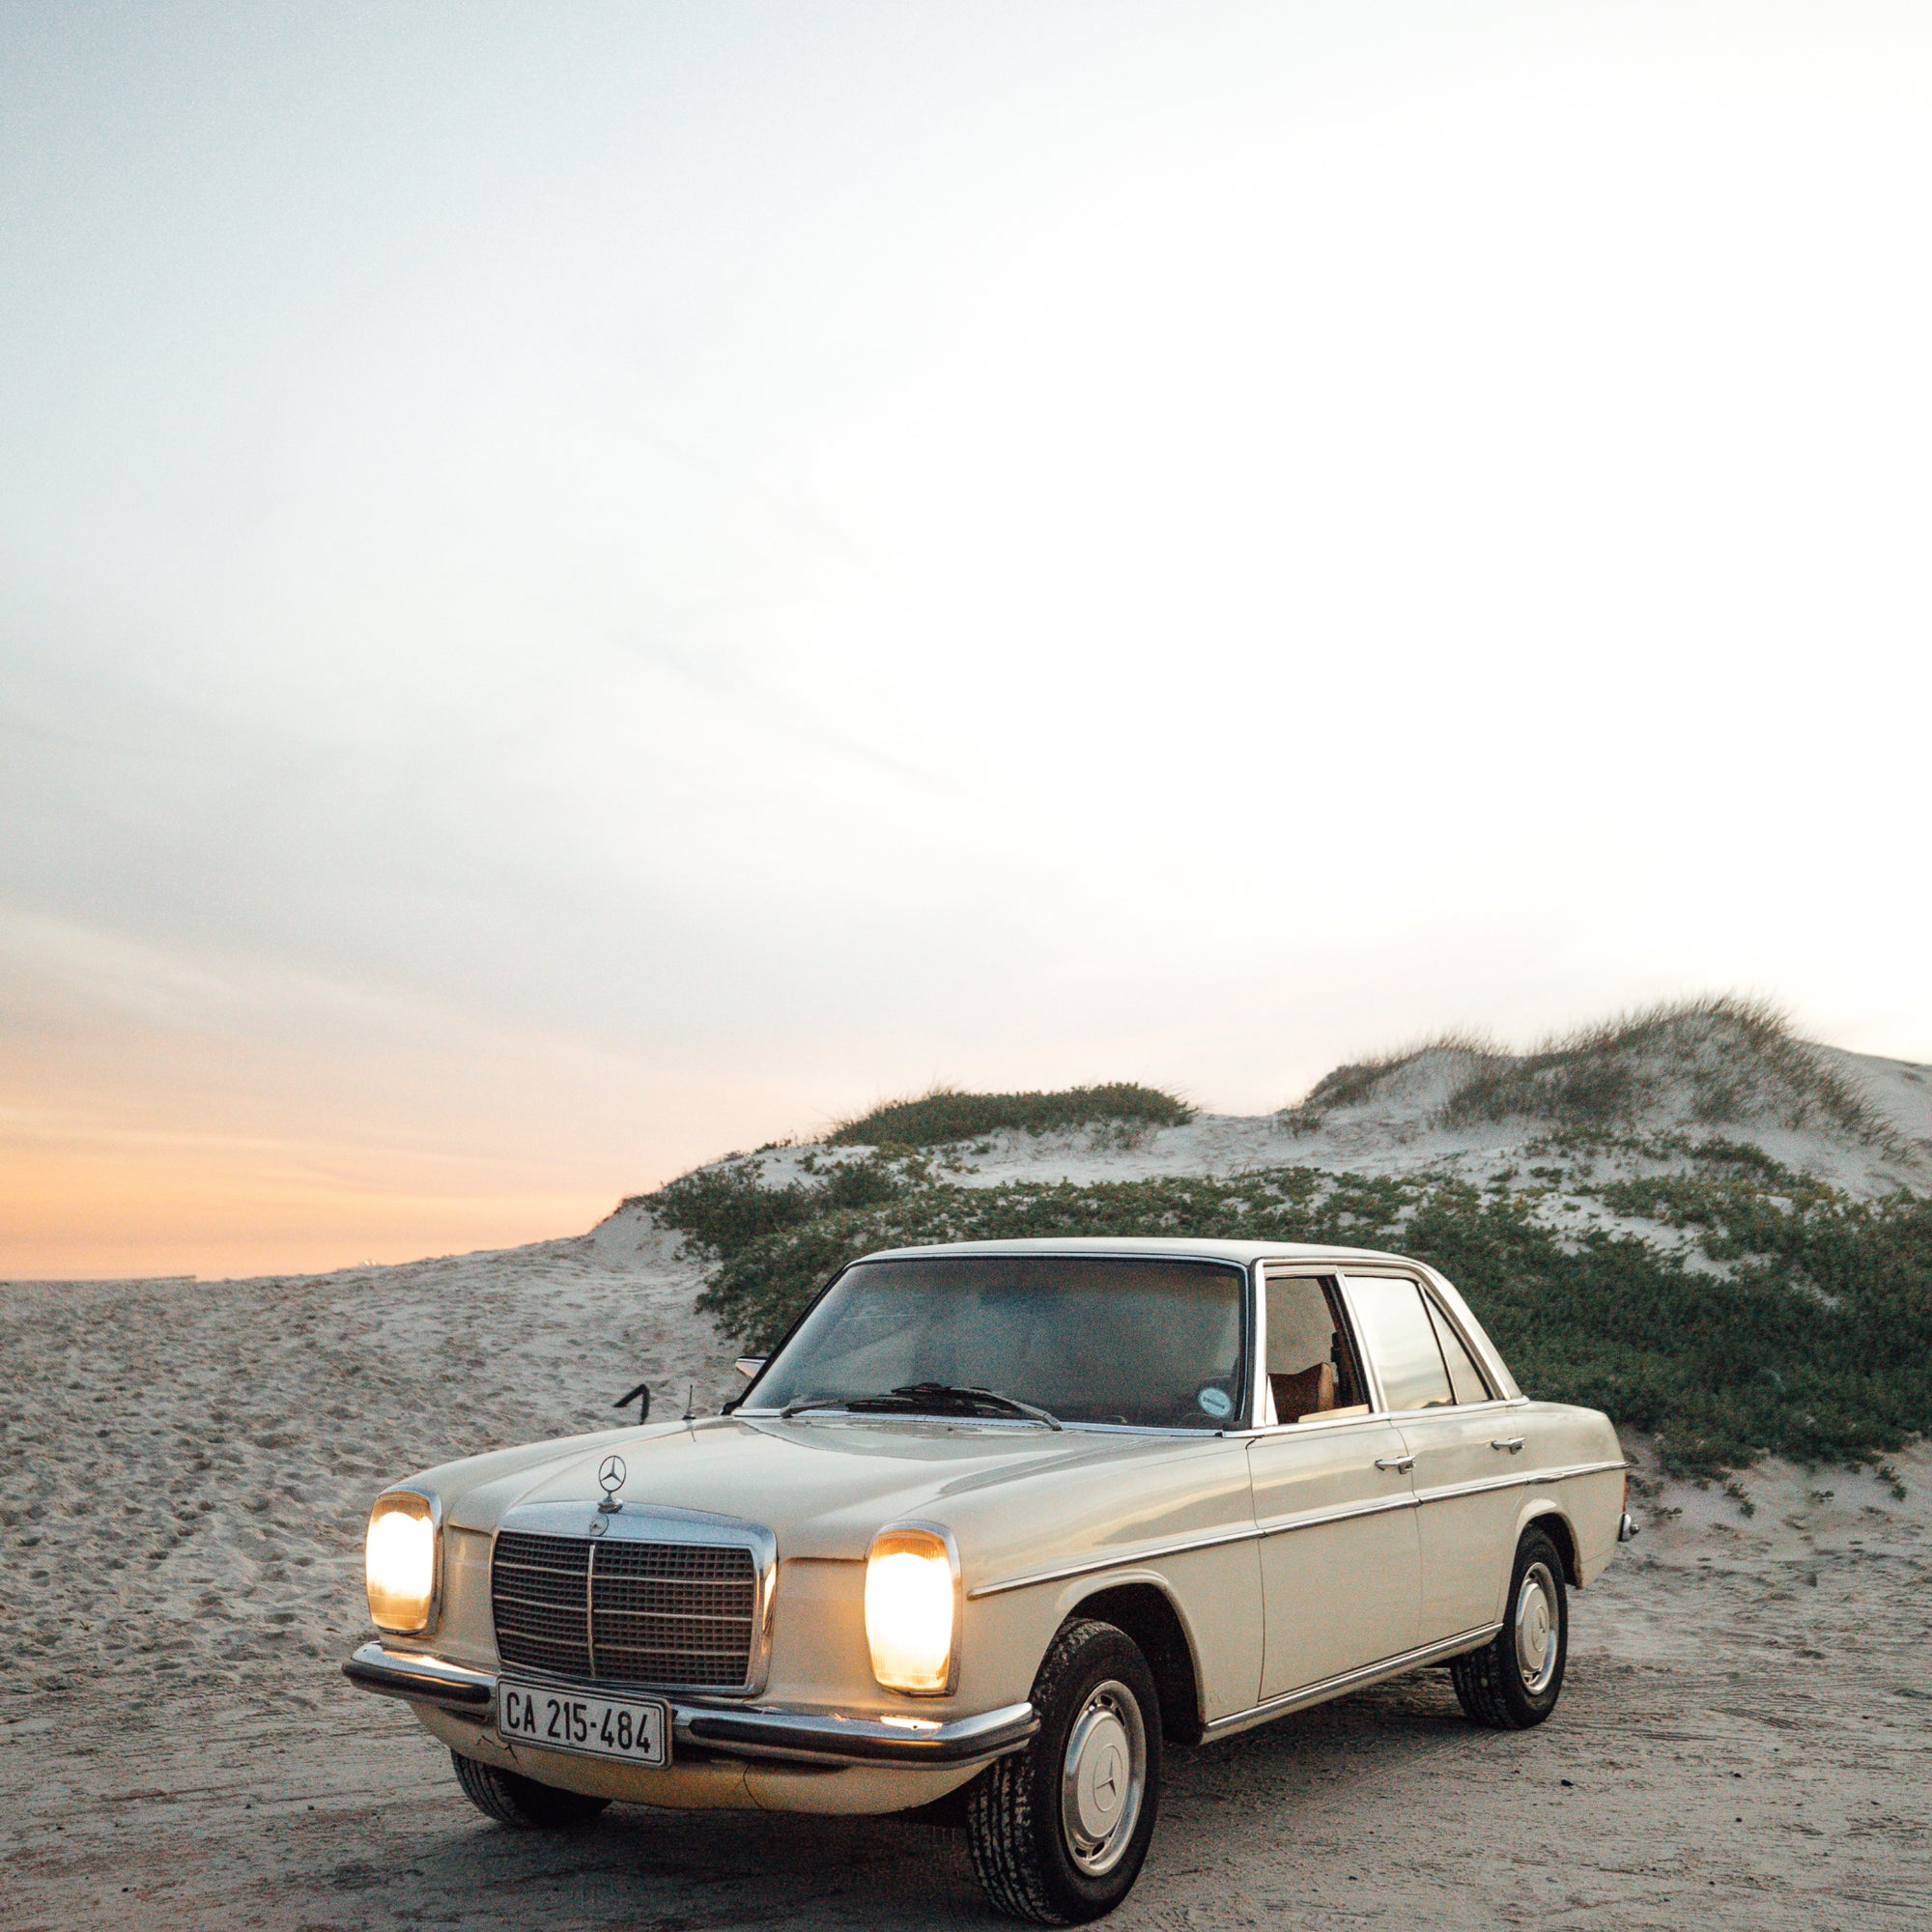 A classic vintage car parked on the sand of a beach in South Africa